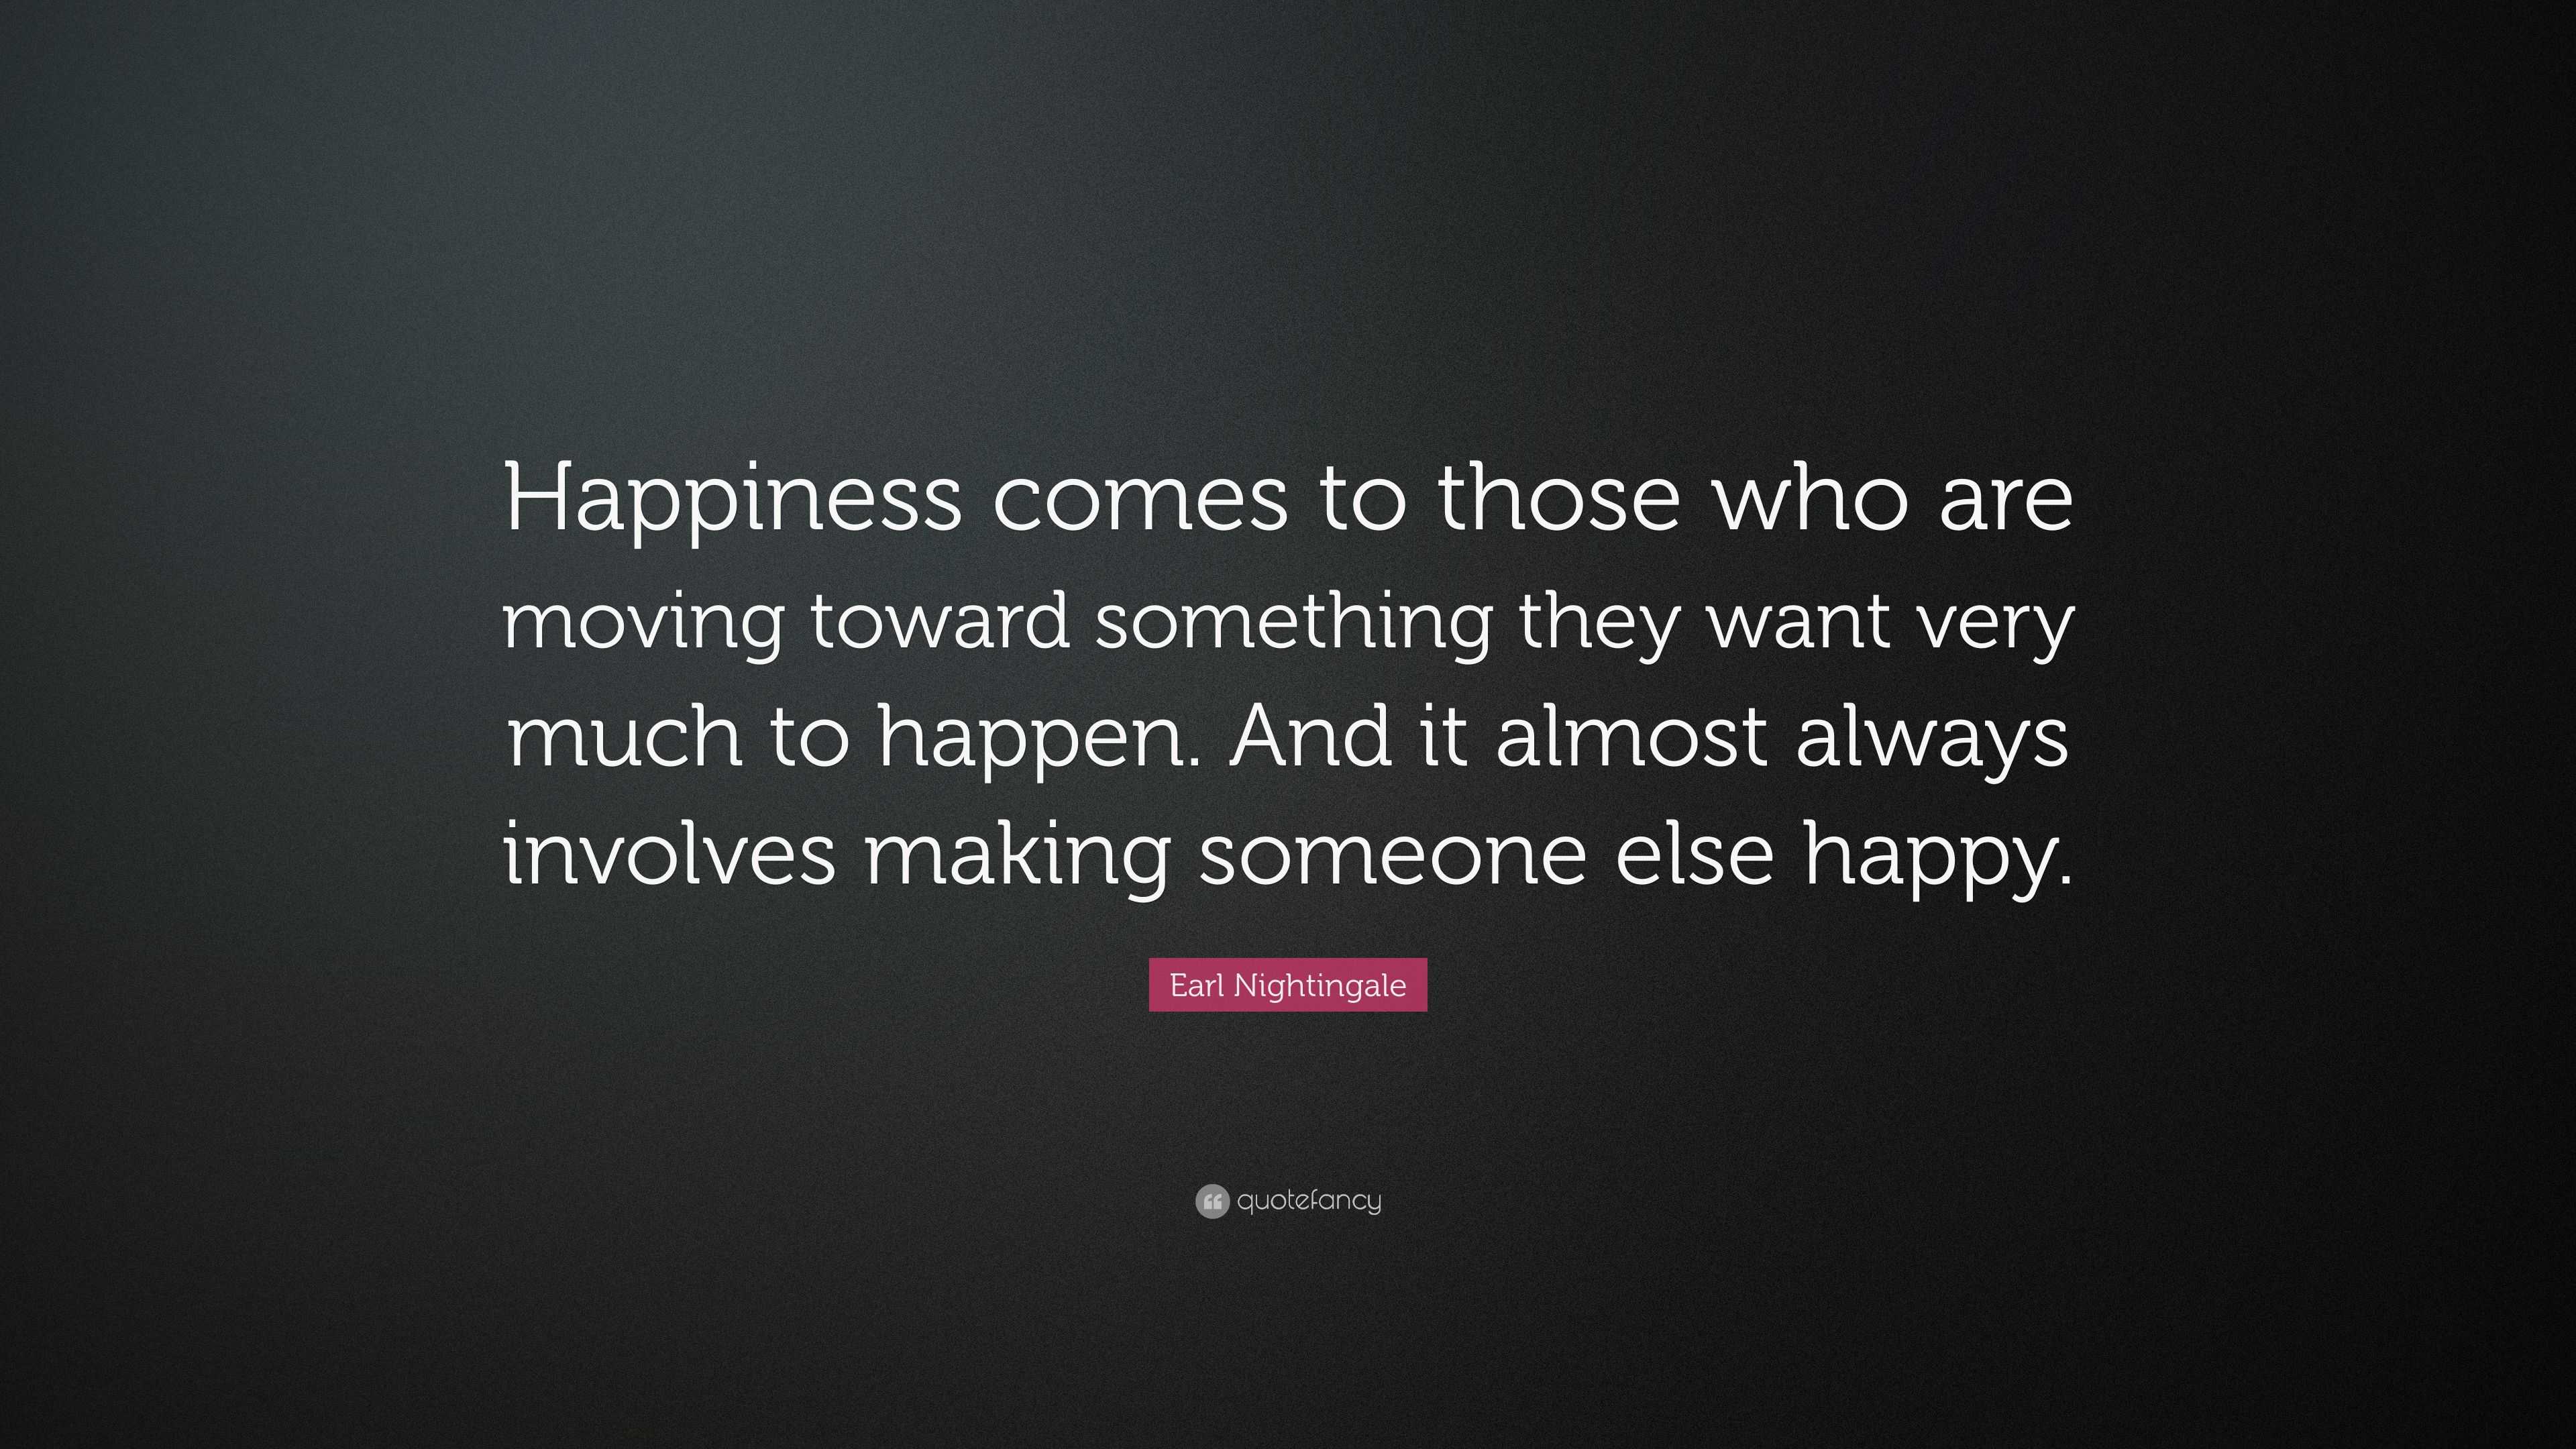 Earl Nightingale Quote: “Happiness comes to those who are moving toward ...